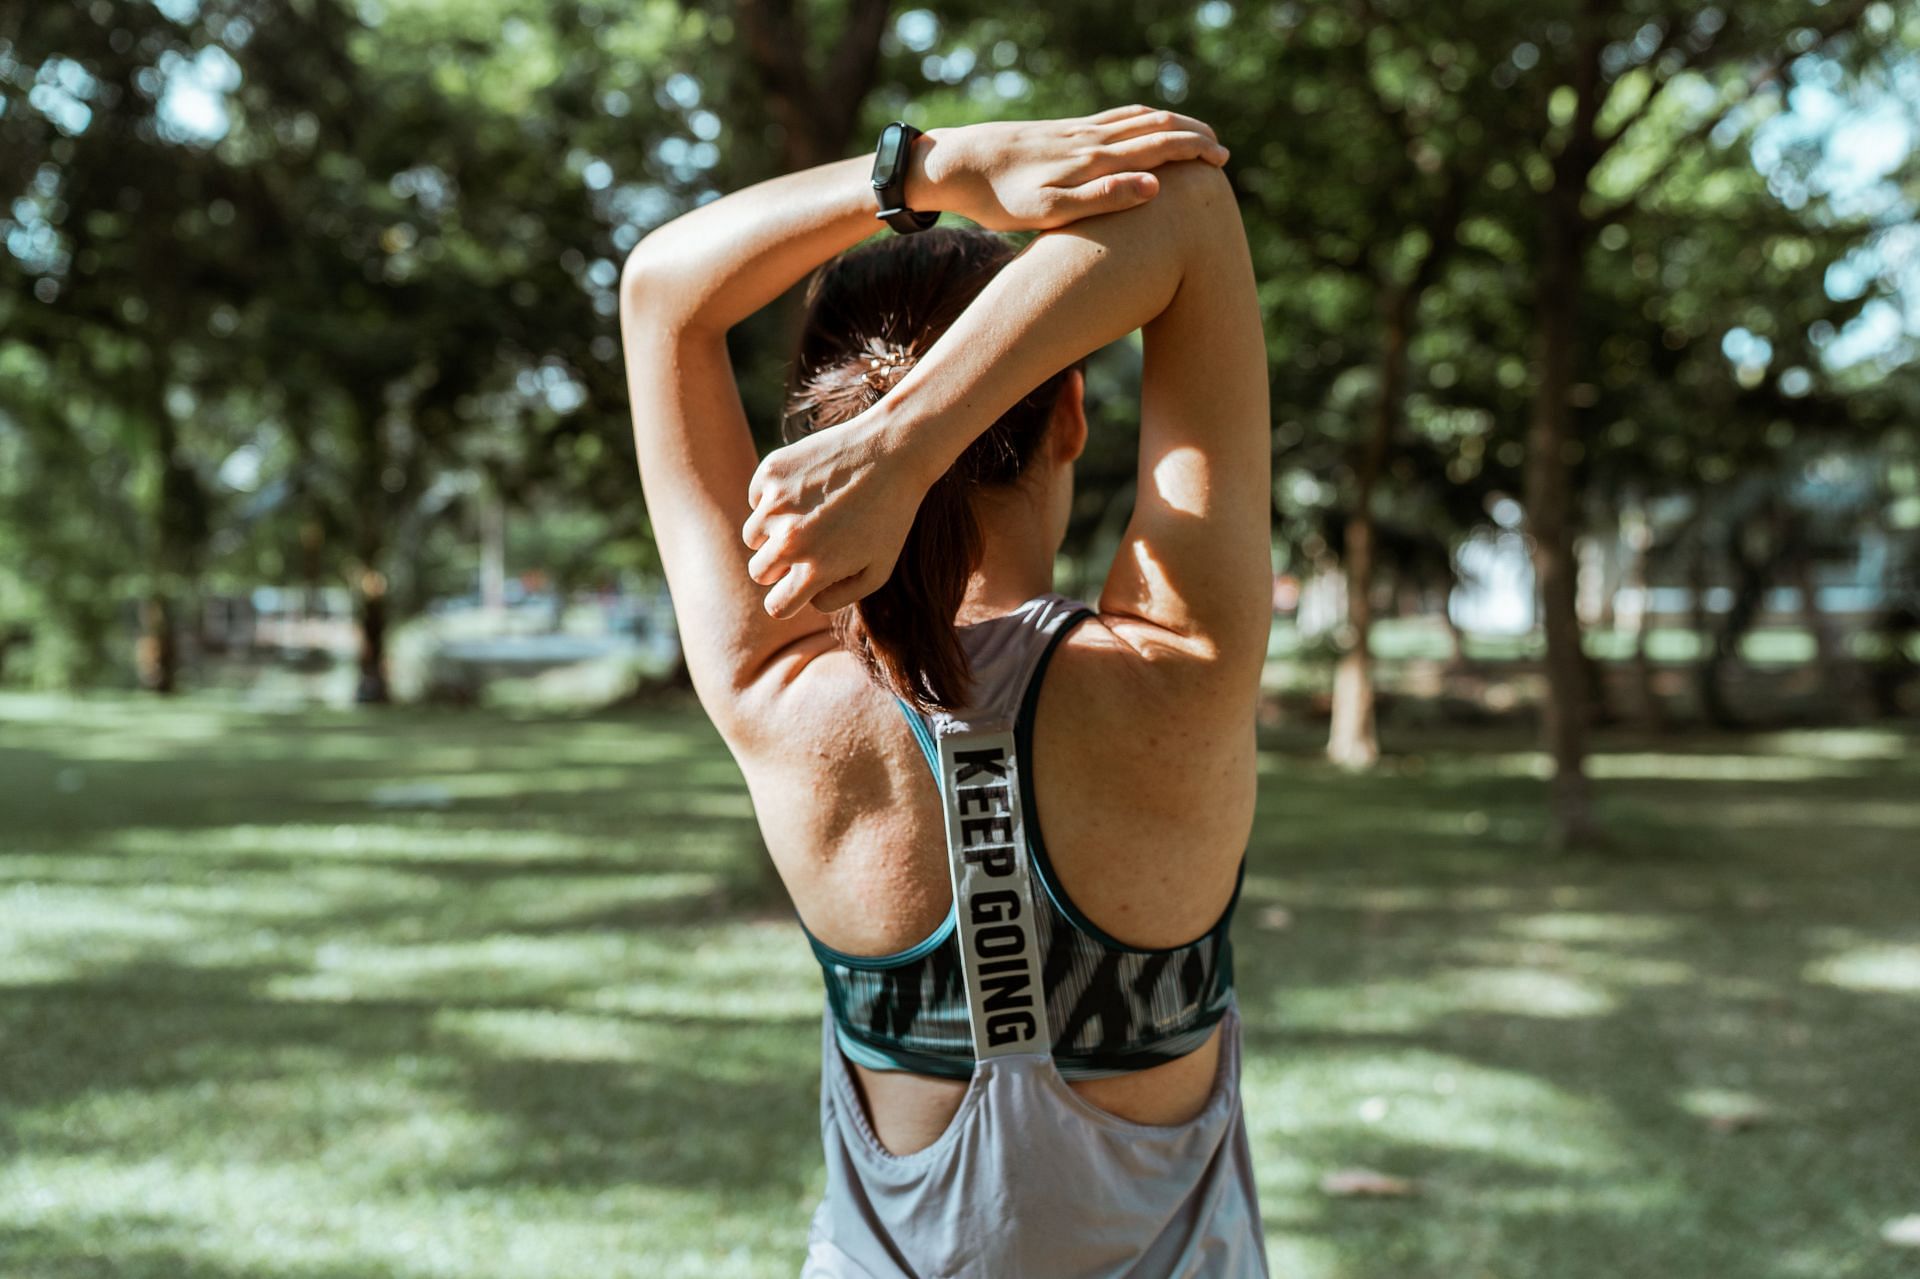 Helps in engaging your core and back muscles. (Image via Pexels / Ketut Subiyanto)